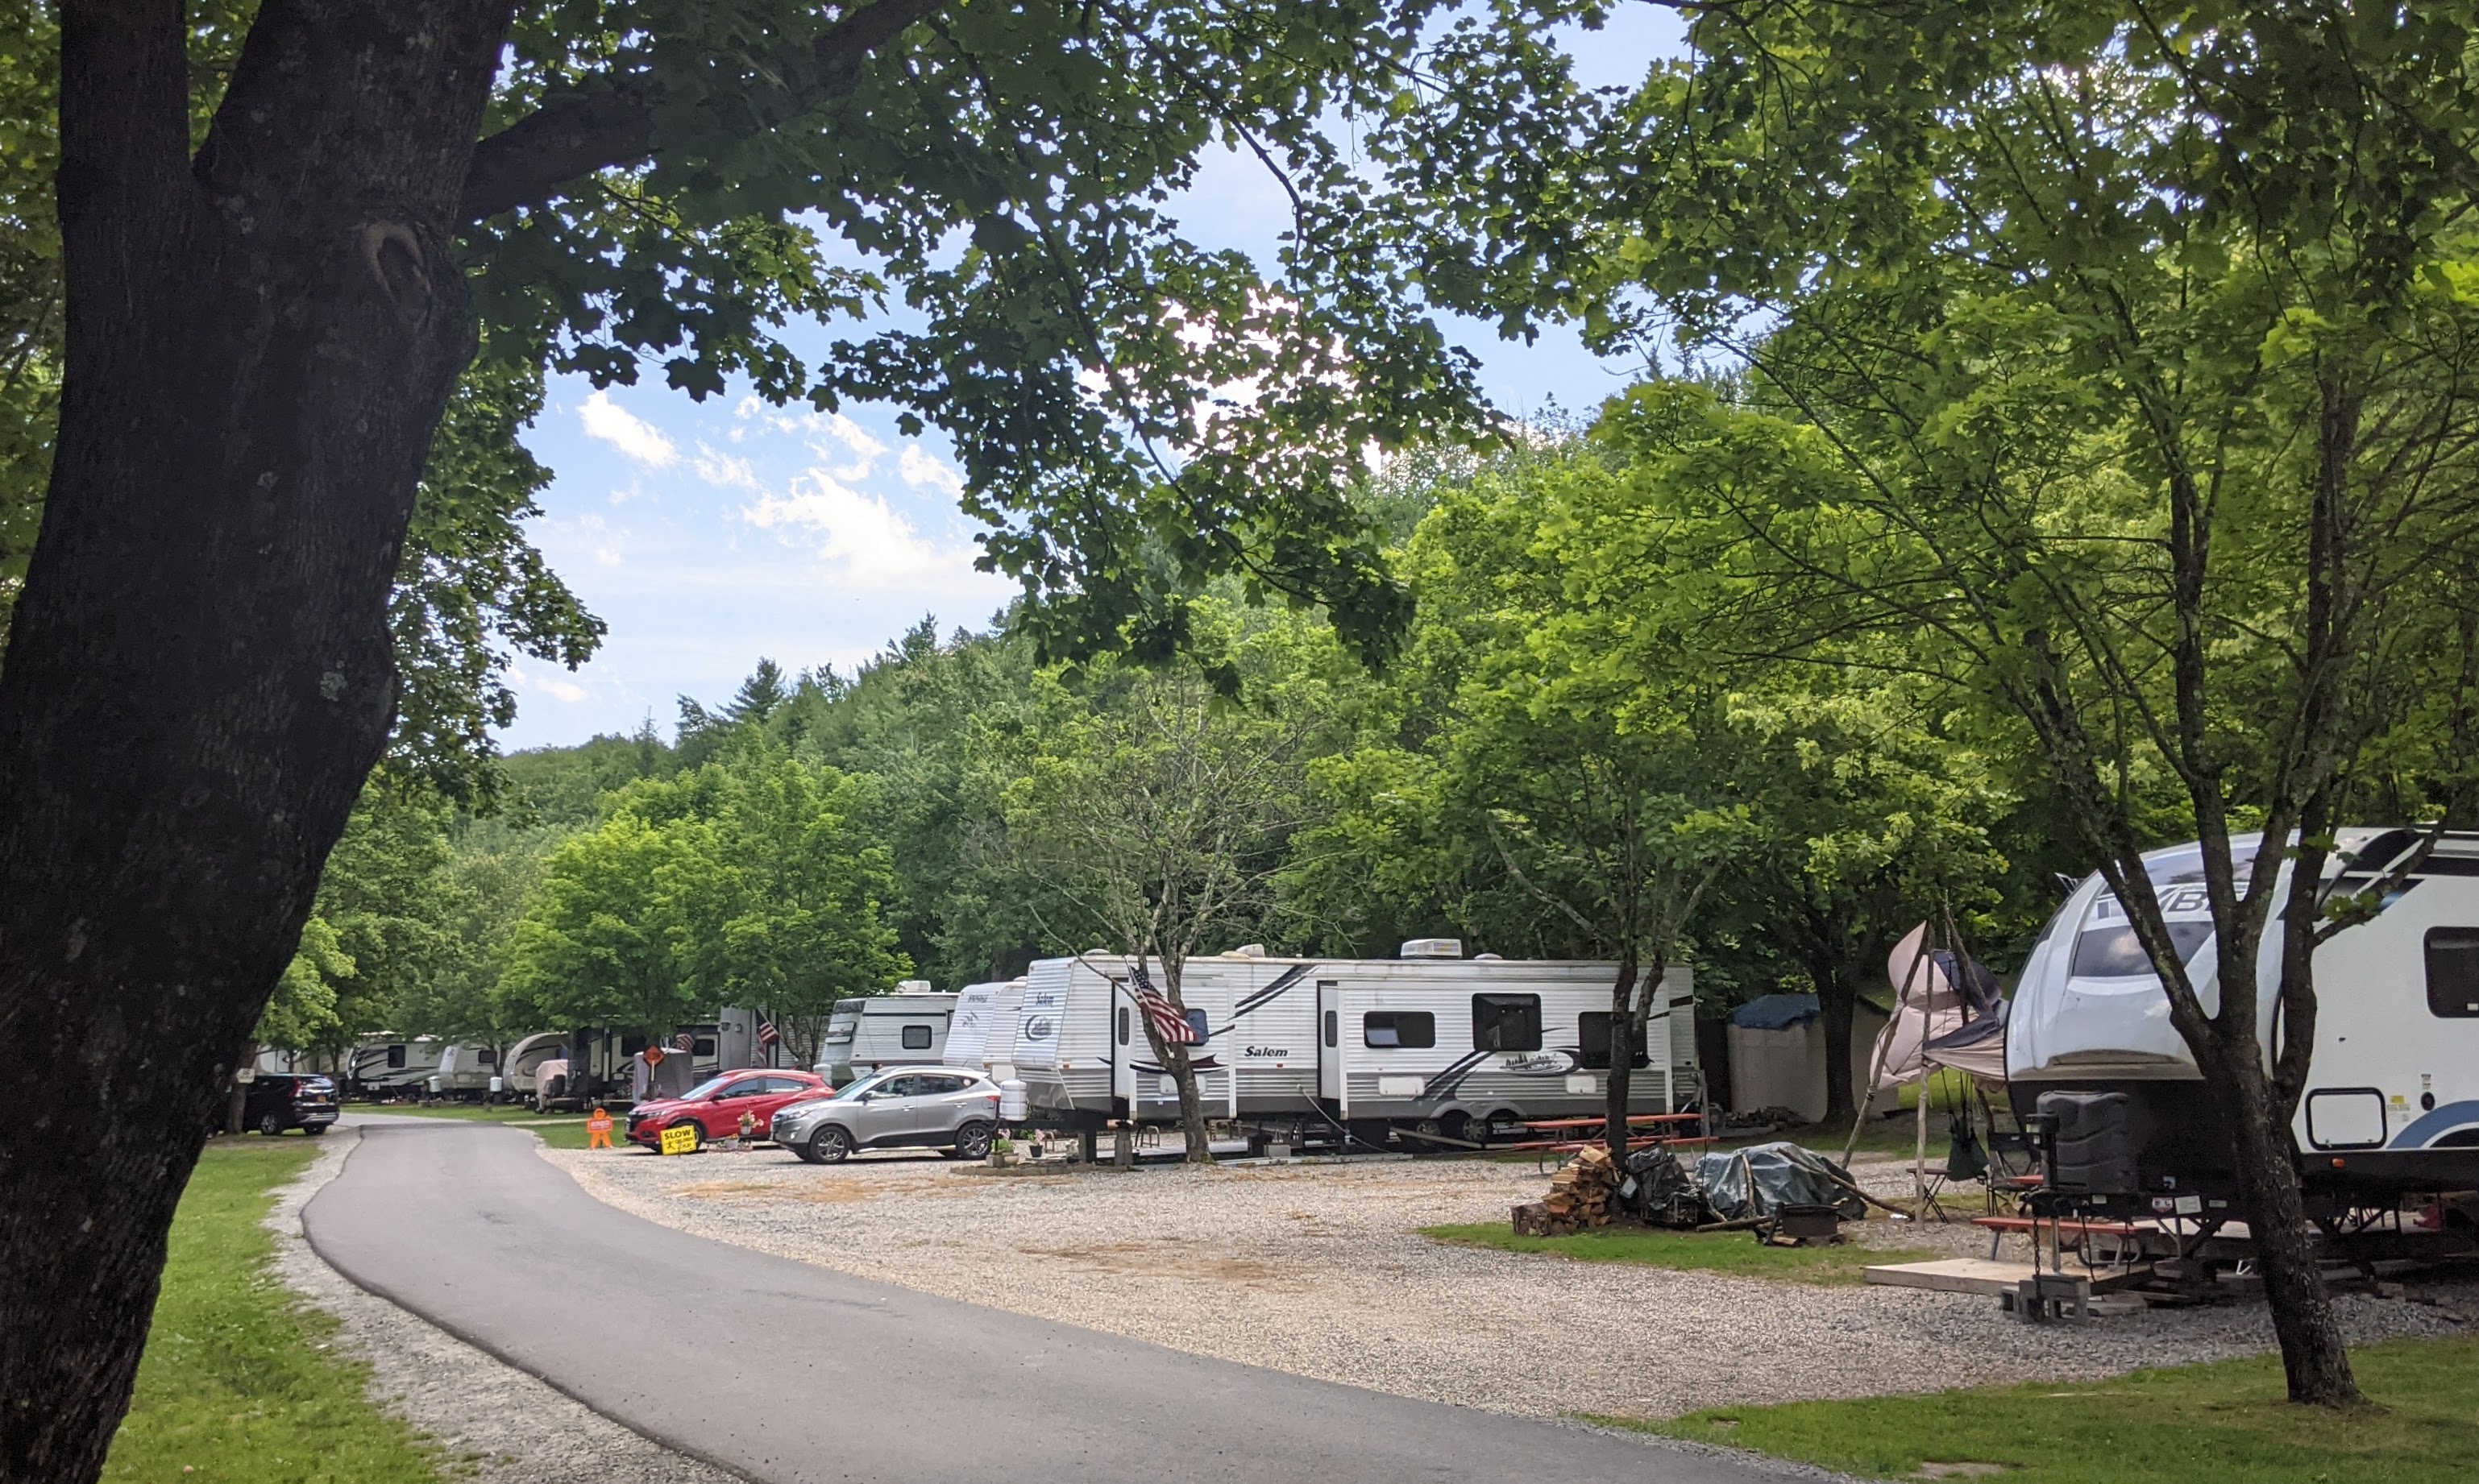 So You Want to Own a Campground / RV Park / Glamping Facility?